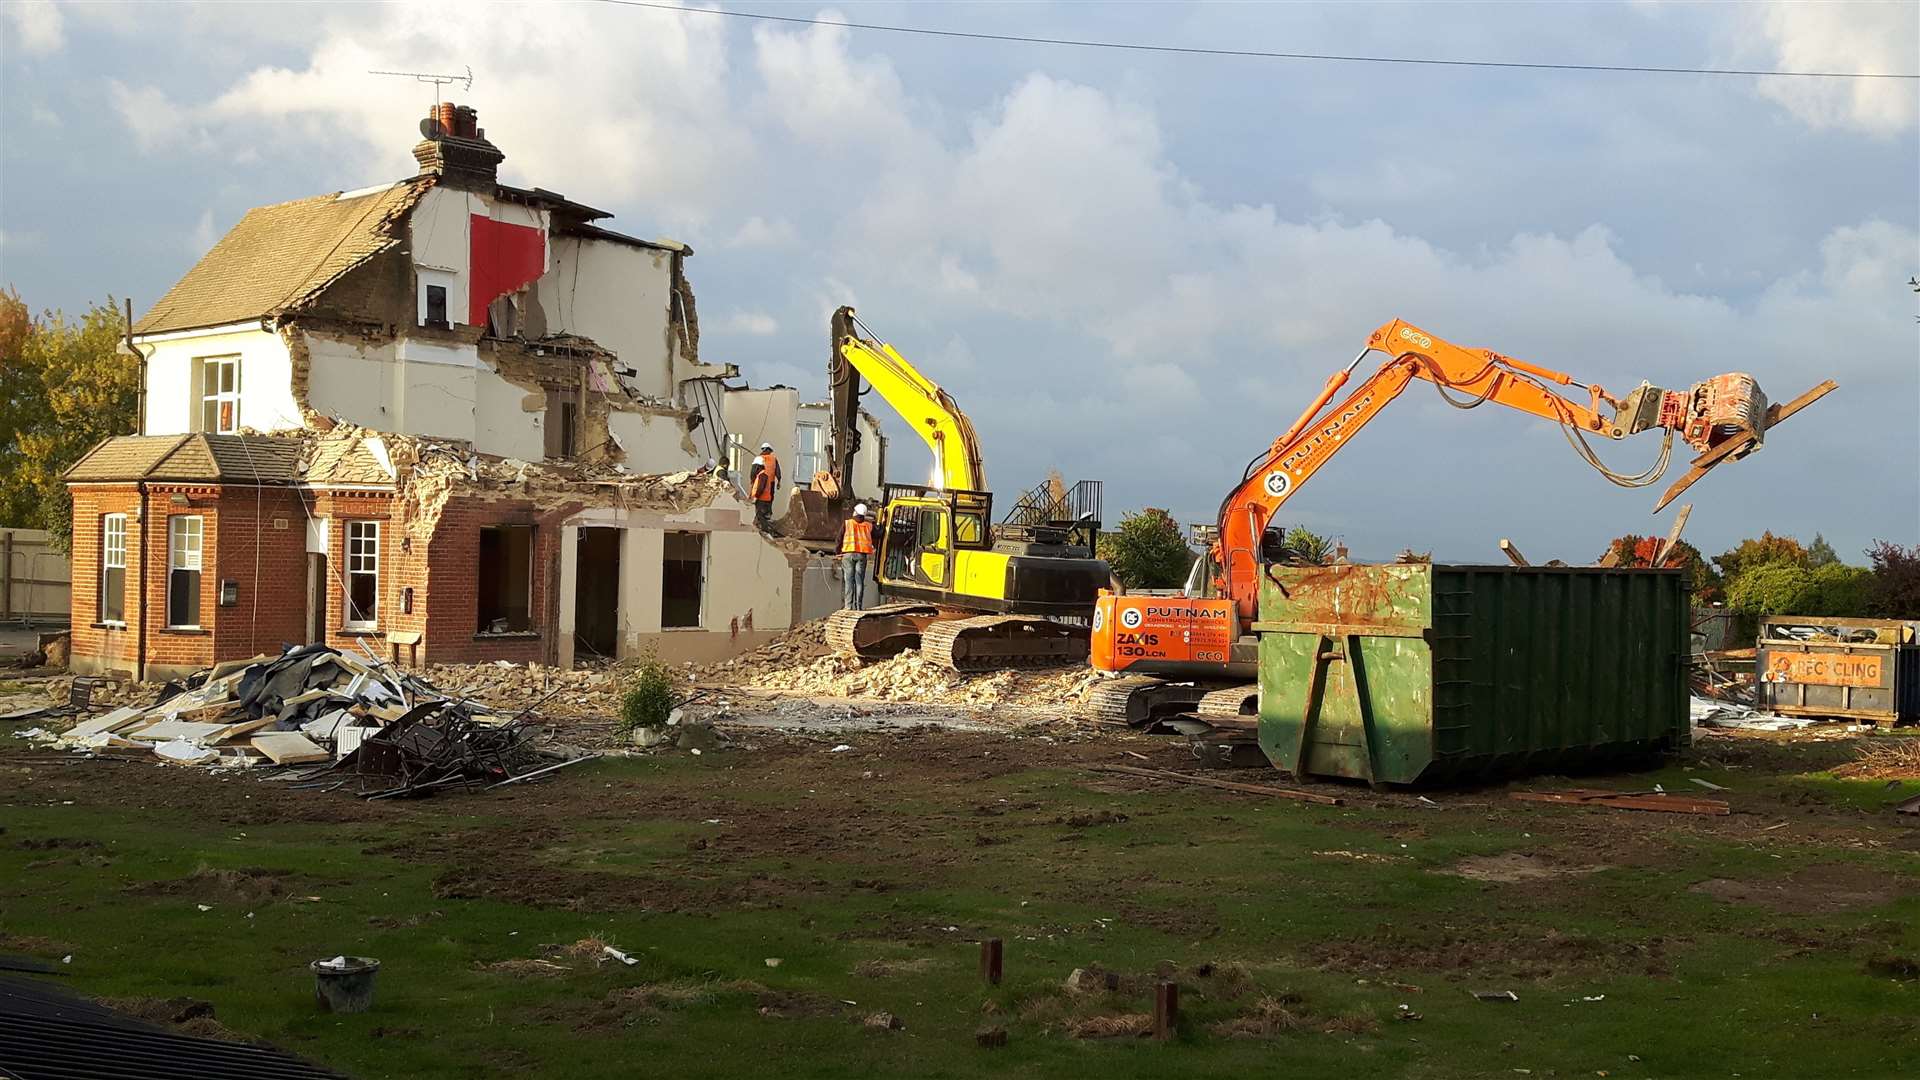 The Battle of Britain pub was illegally demolished